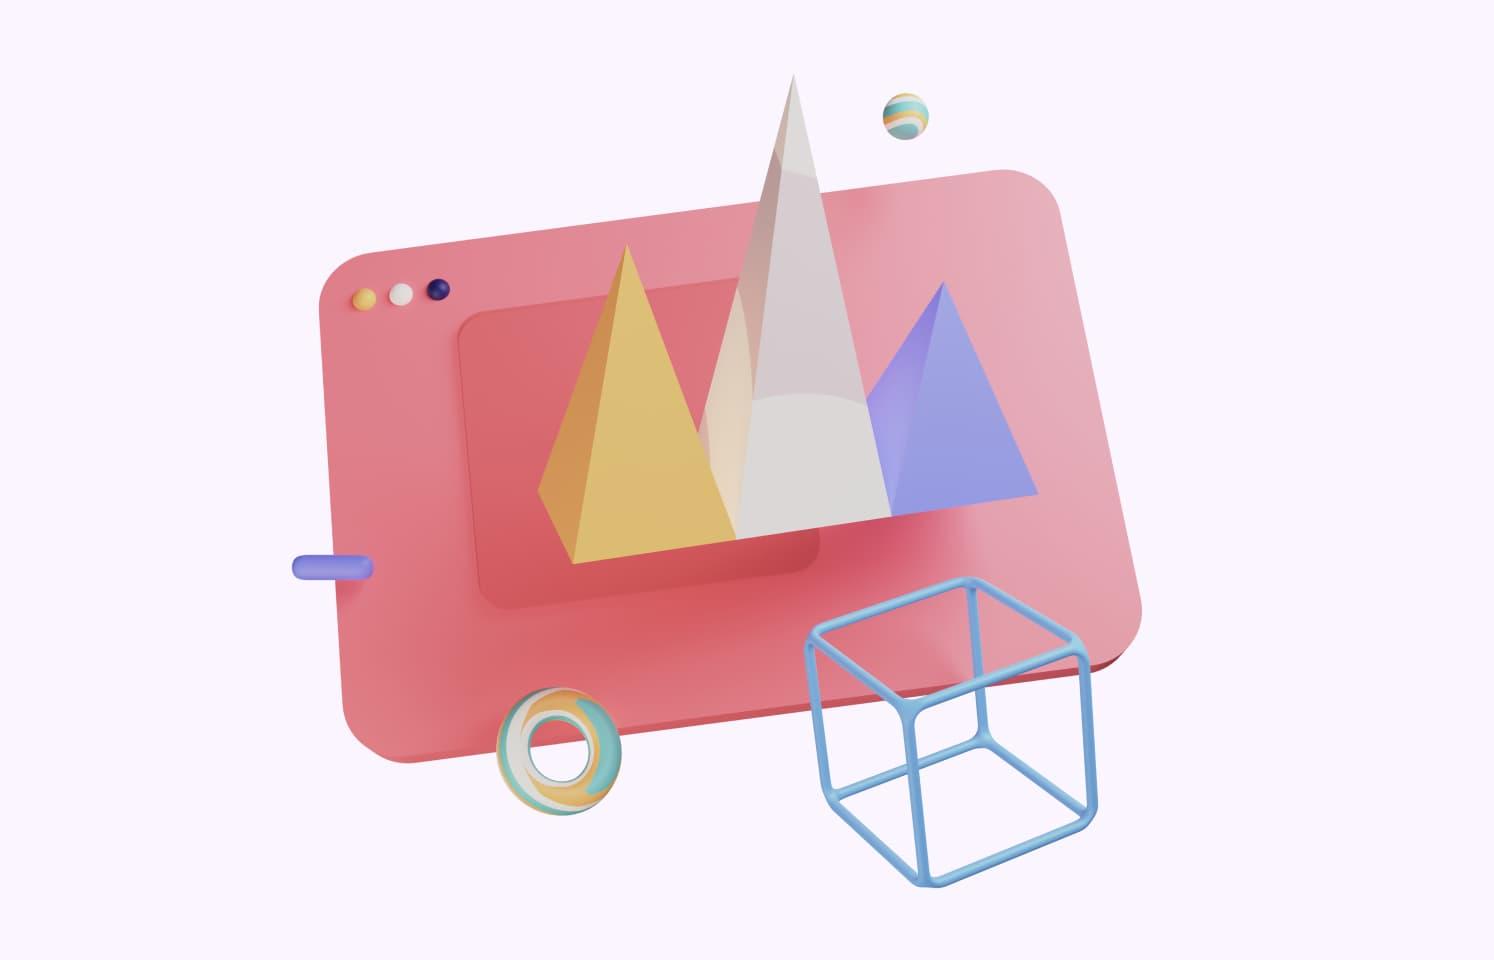  3d illustration of screen and cube